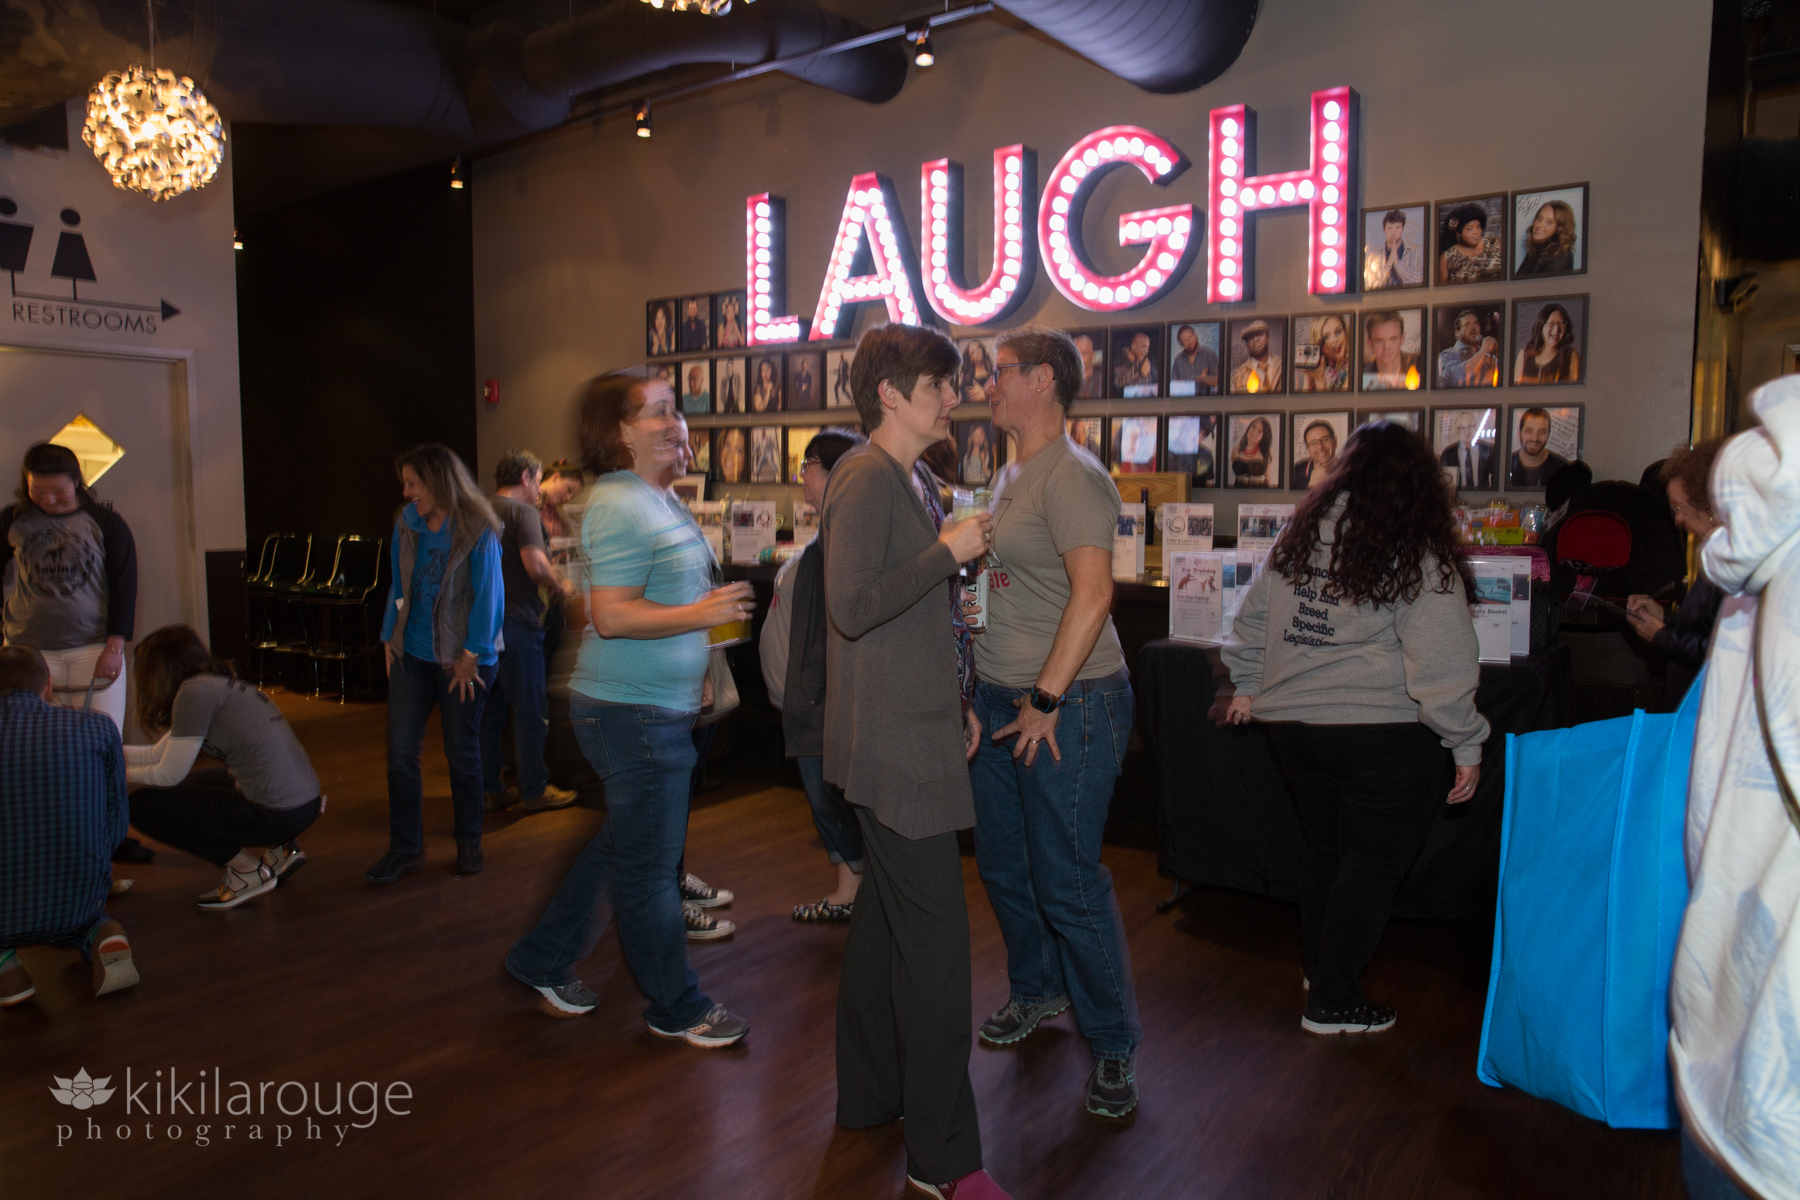 People mingling and bidding on Silent Auction in front of Laugh sign